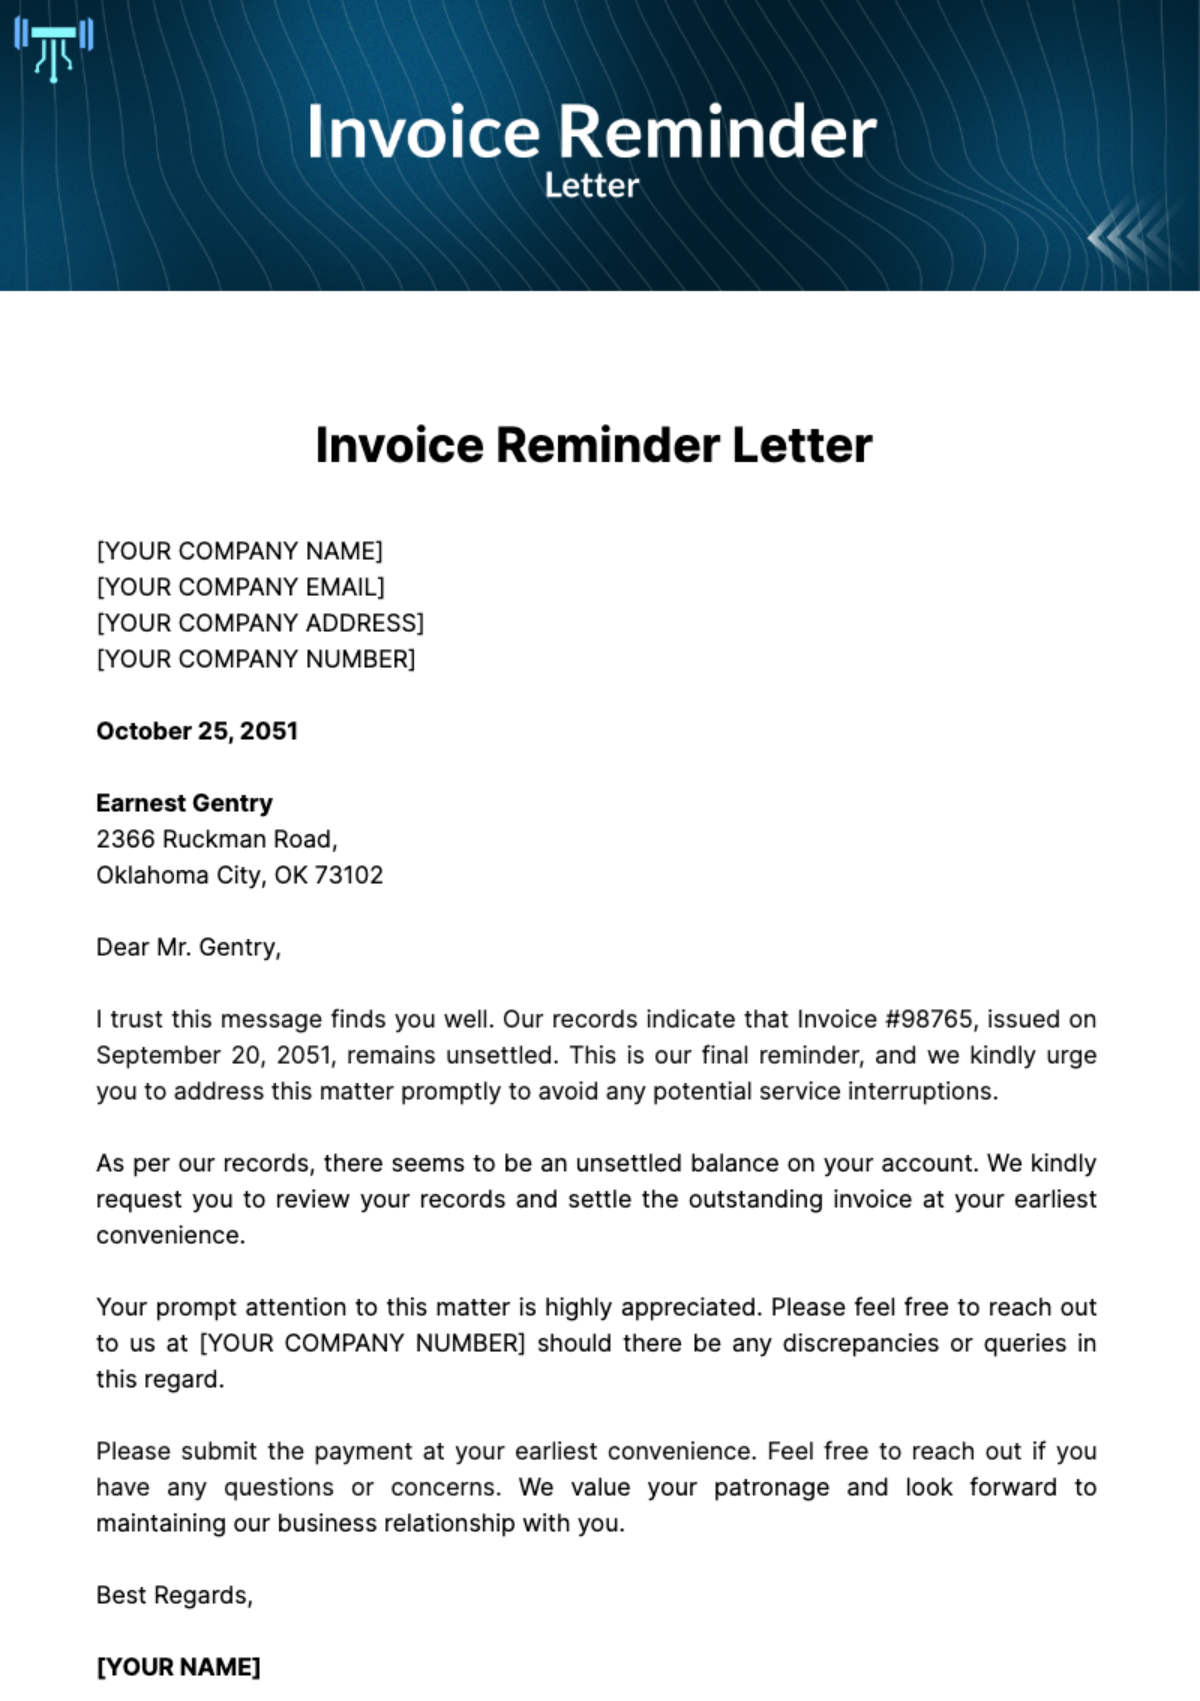 Invoice Reminder Letter Template